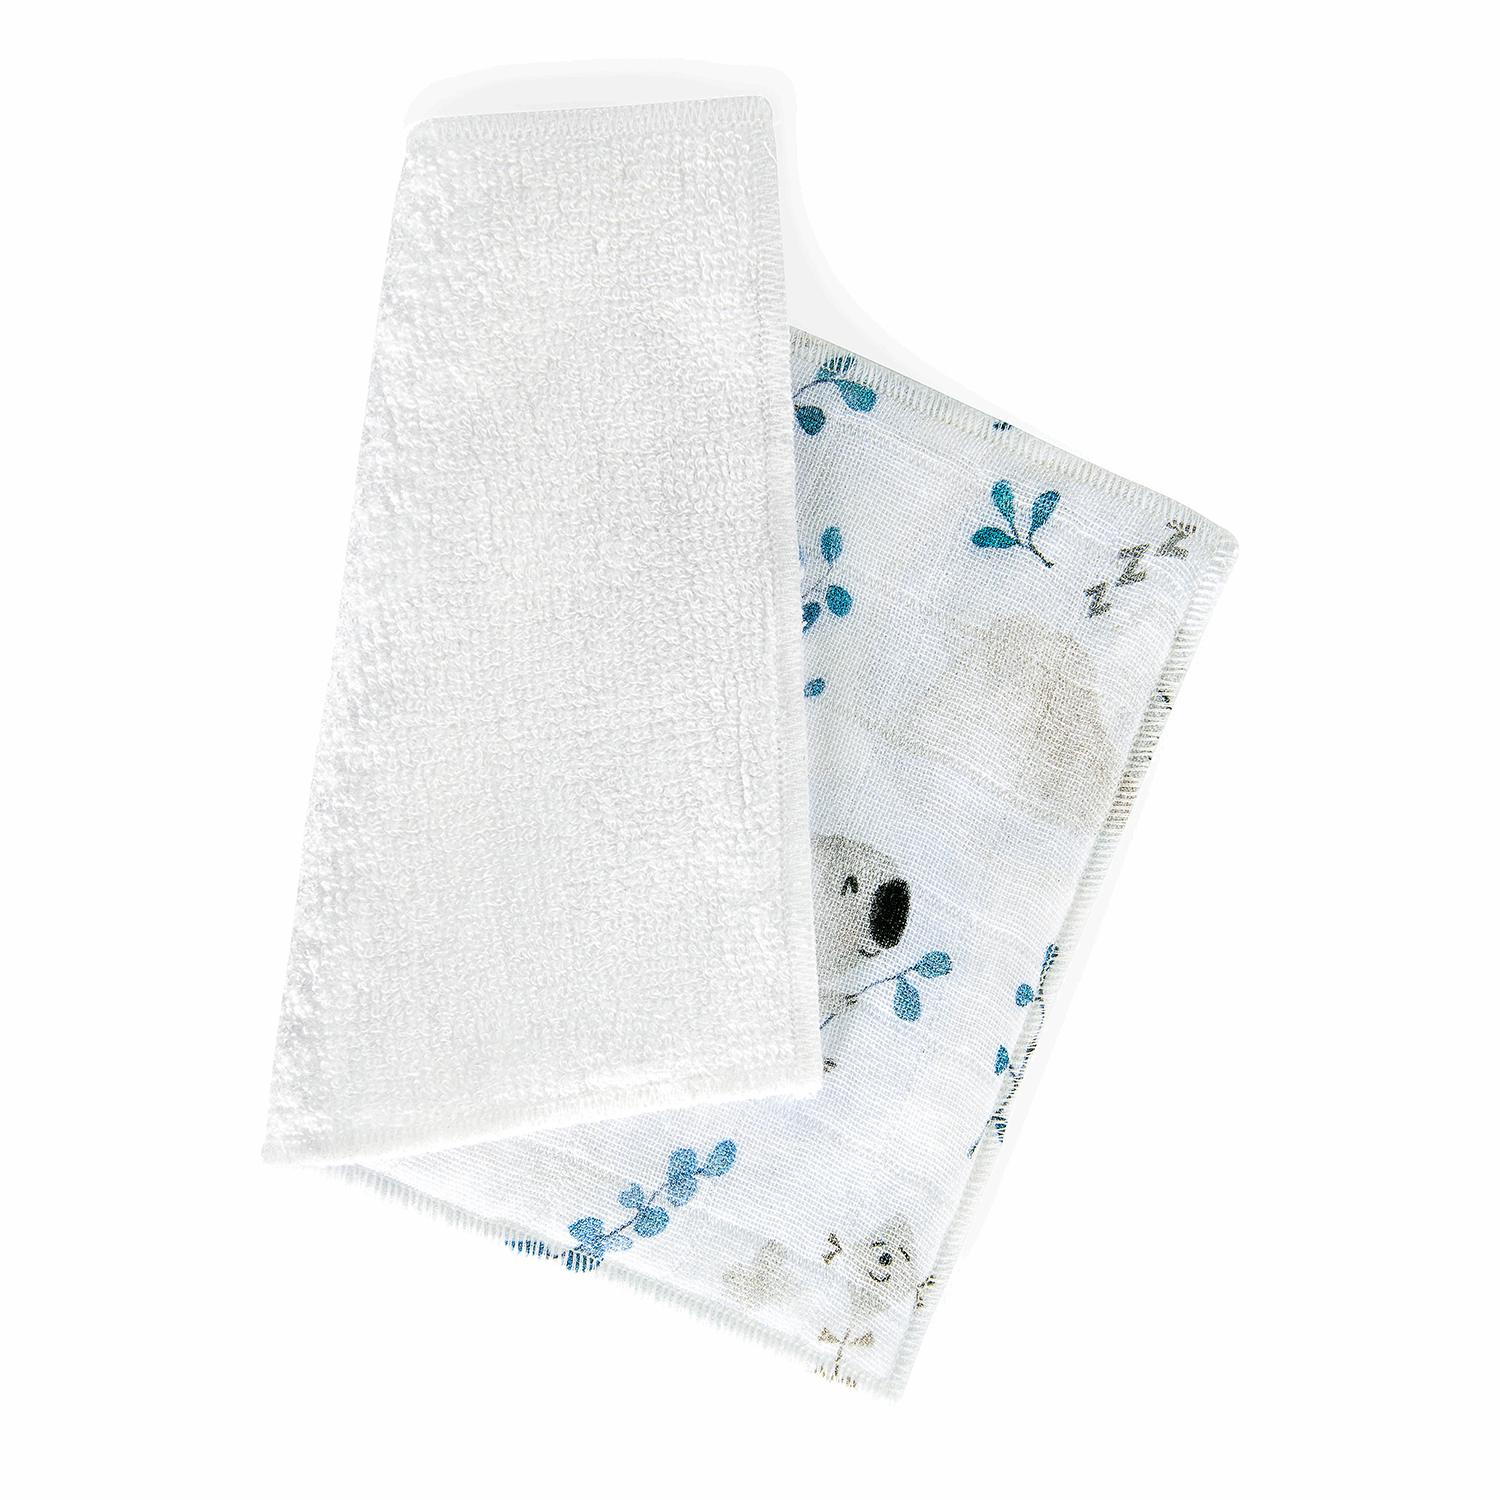 Bamboo washcloth 5pack - Blue/silver